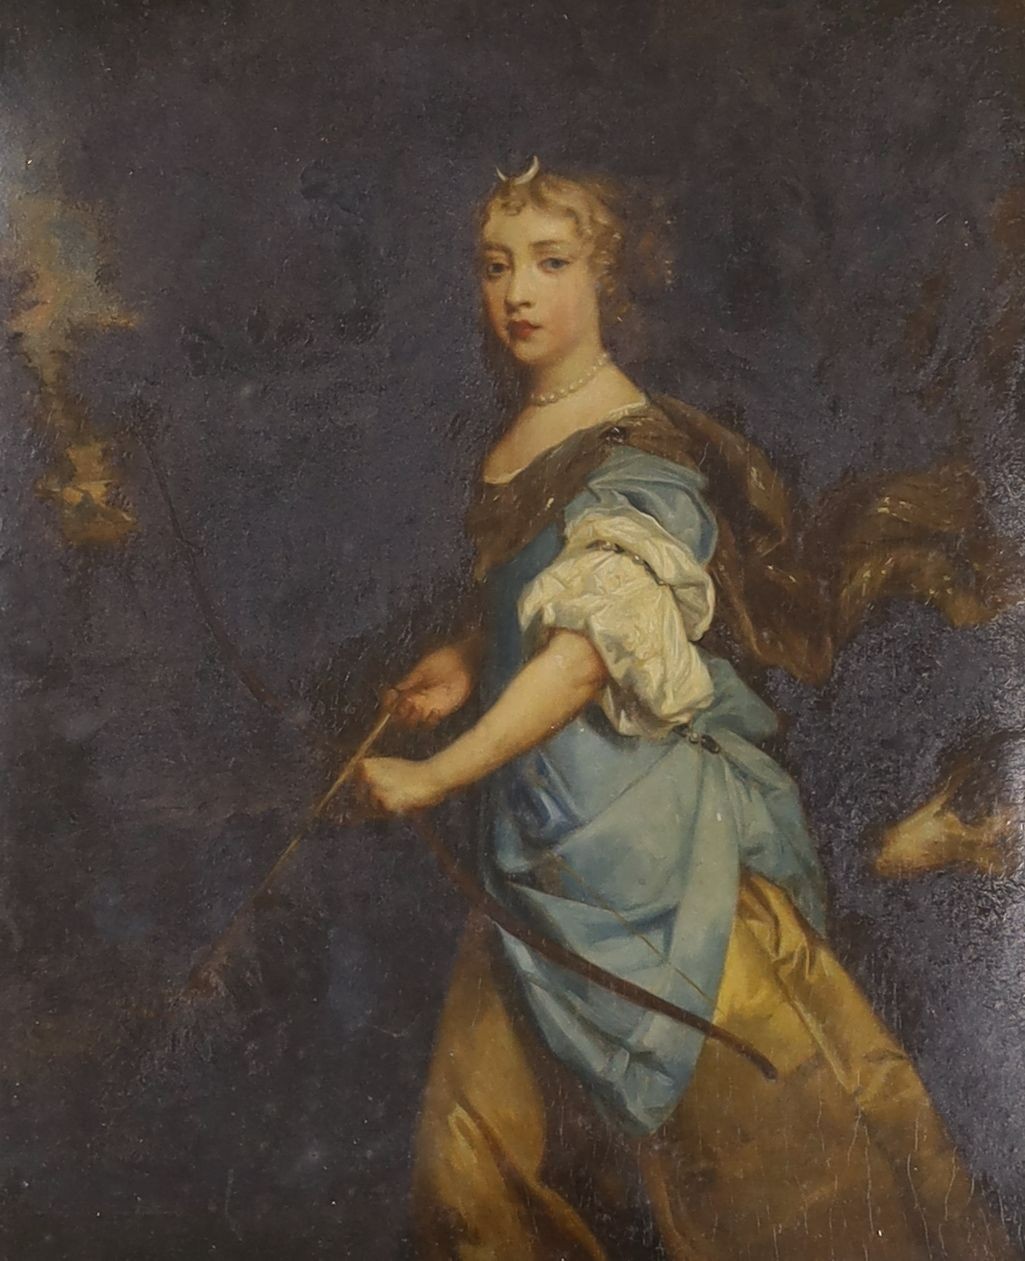 After Peter Lely, overpainted print, Jane Kelleway as Diana holding a bow, 27 x 23cm, in ornate